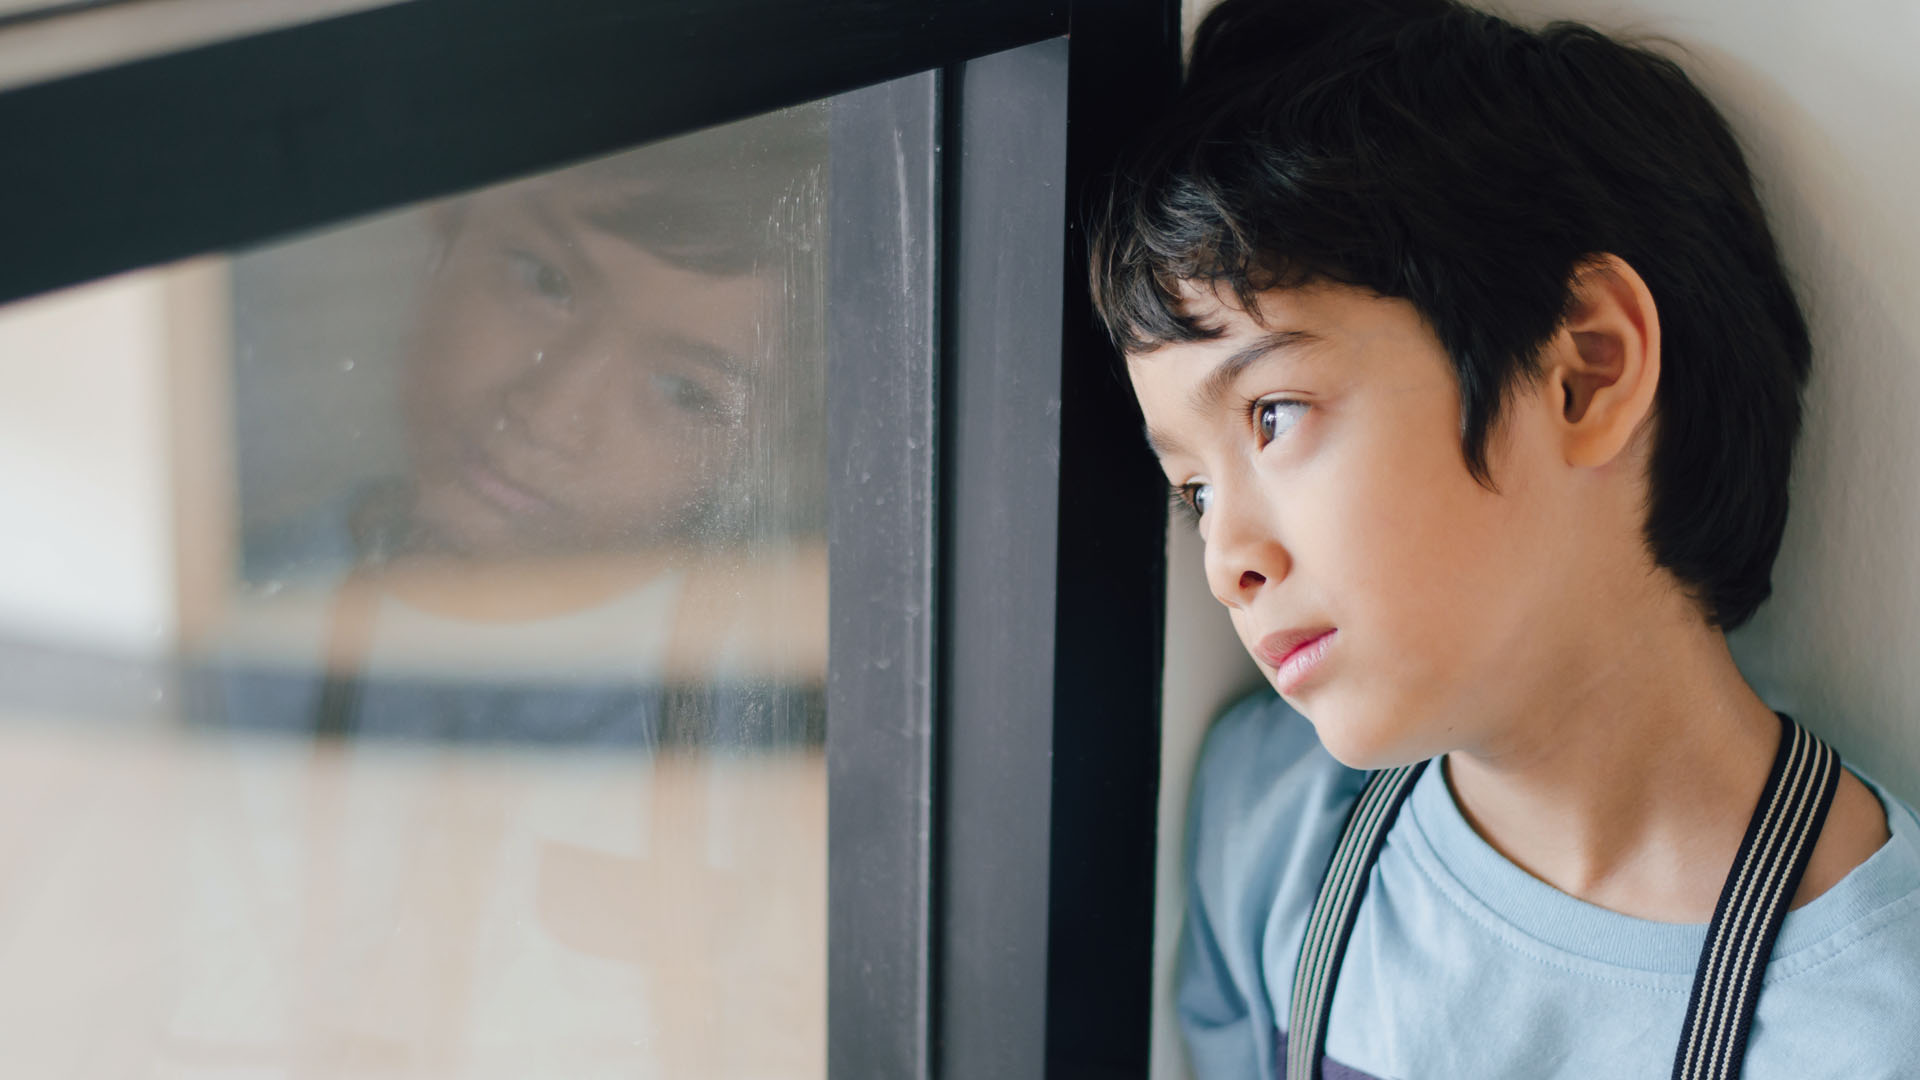 Boy gazing distantly out of a window.